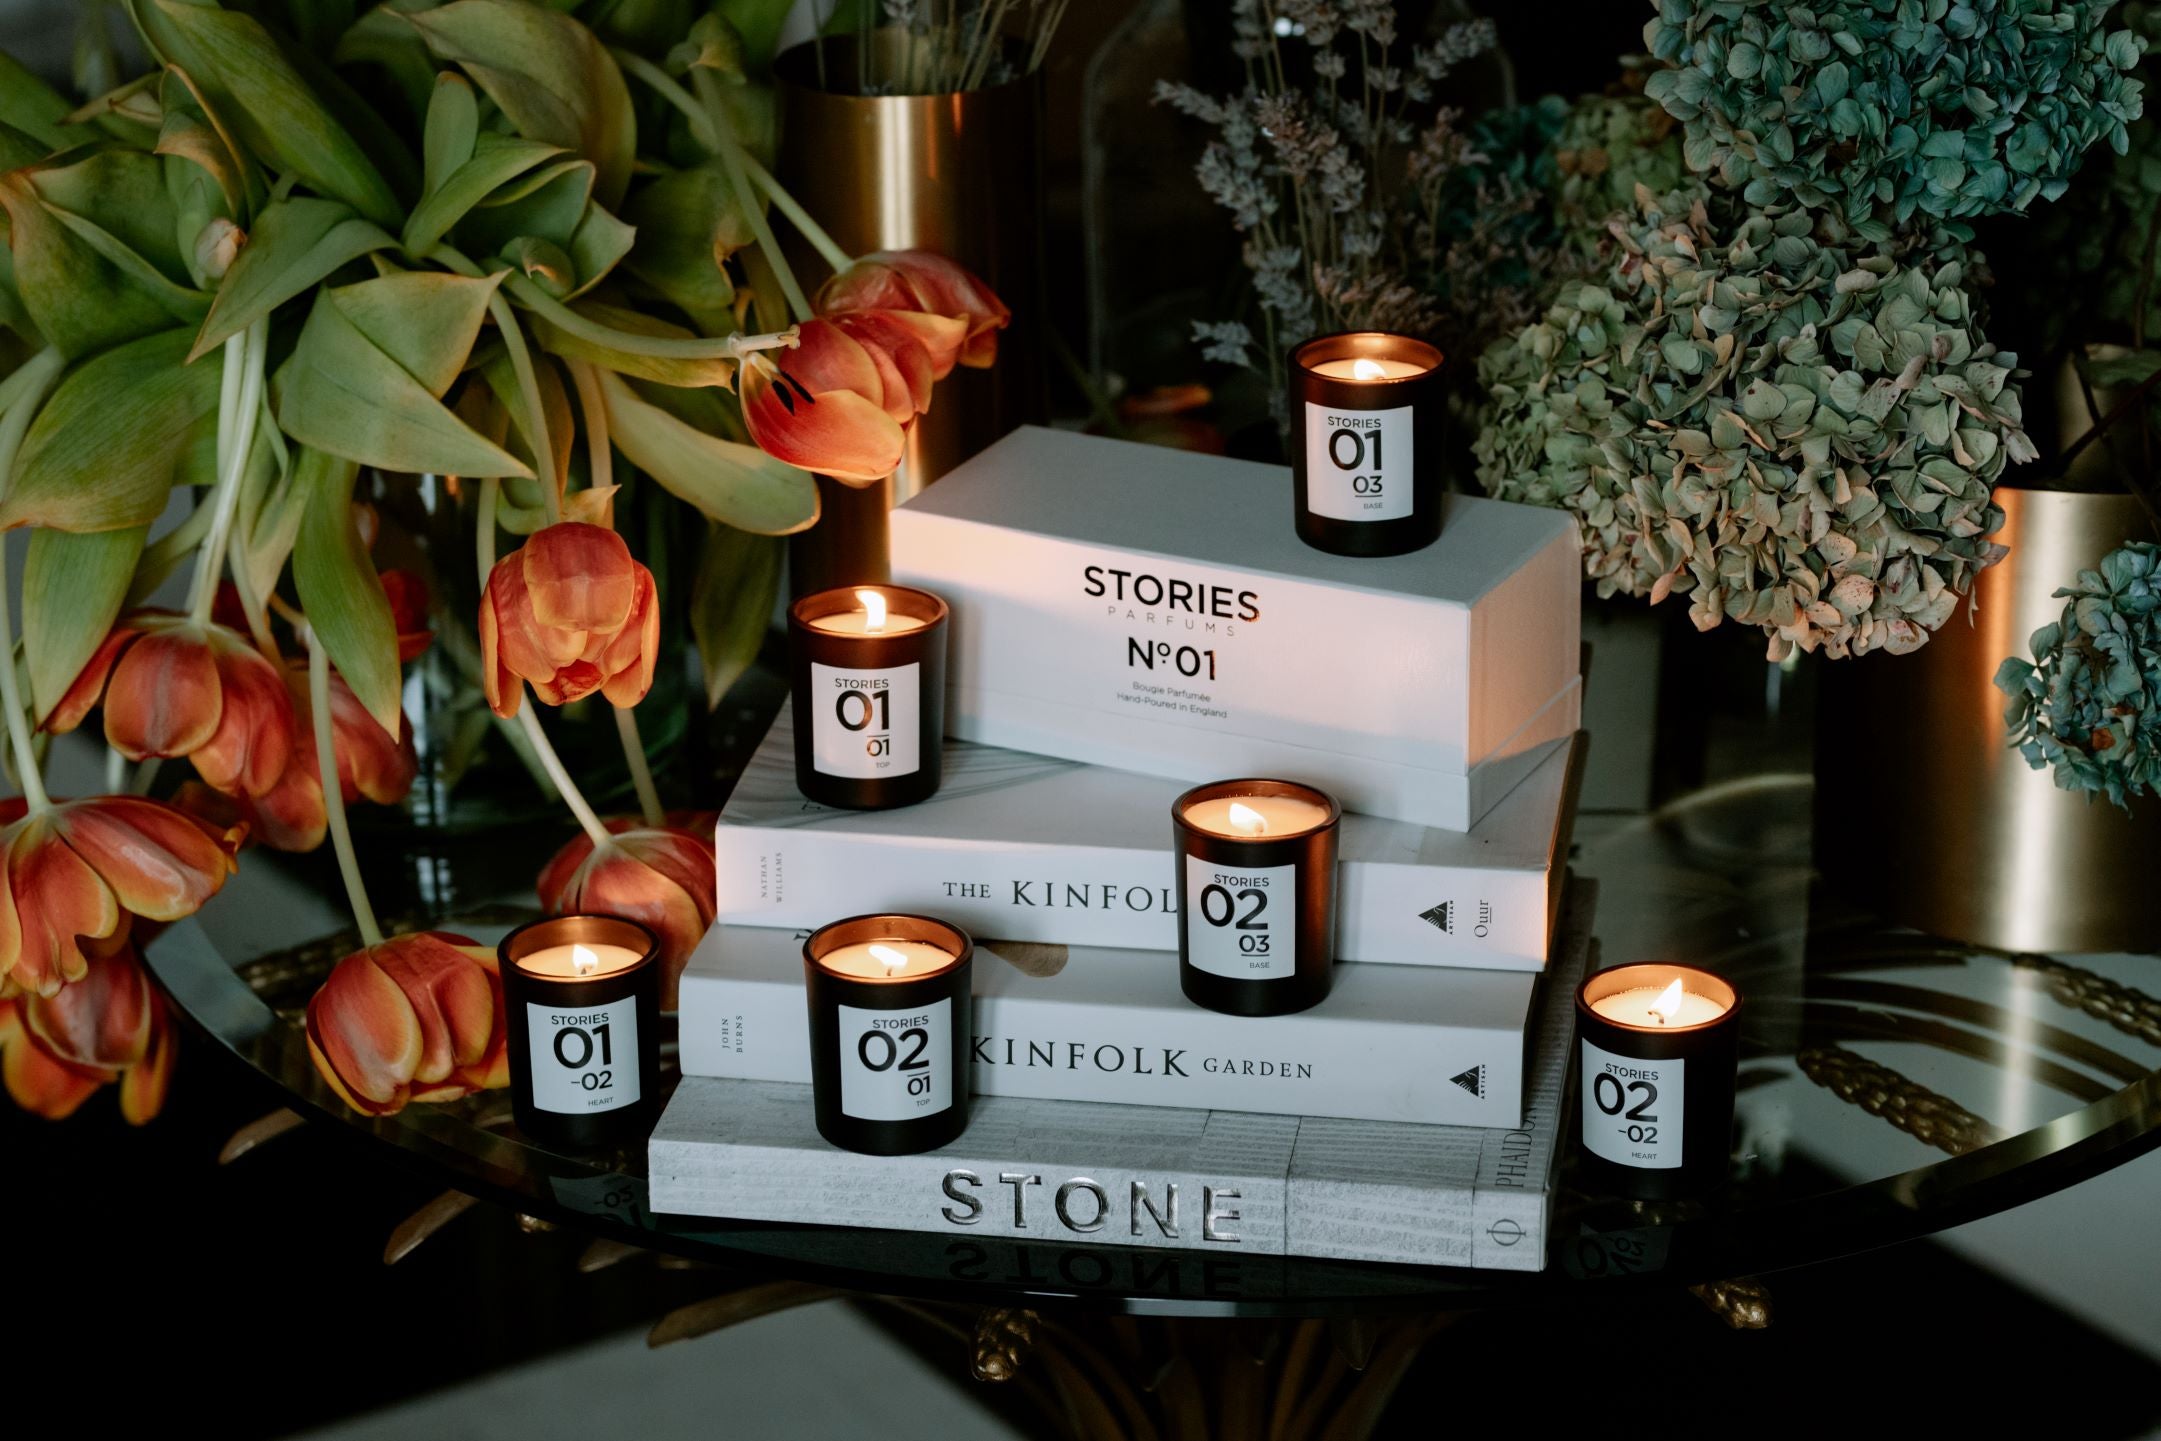 3 STORIES perfumed candles alight in black votives on marble plinth